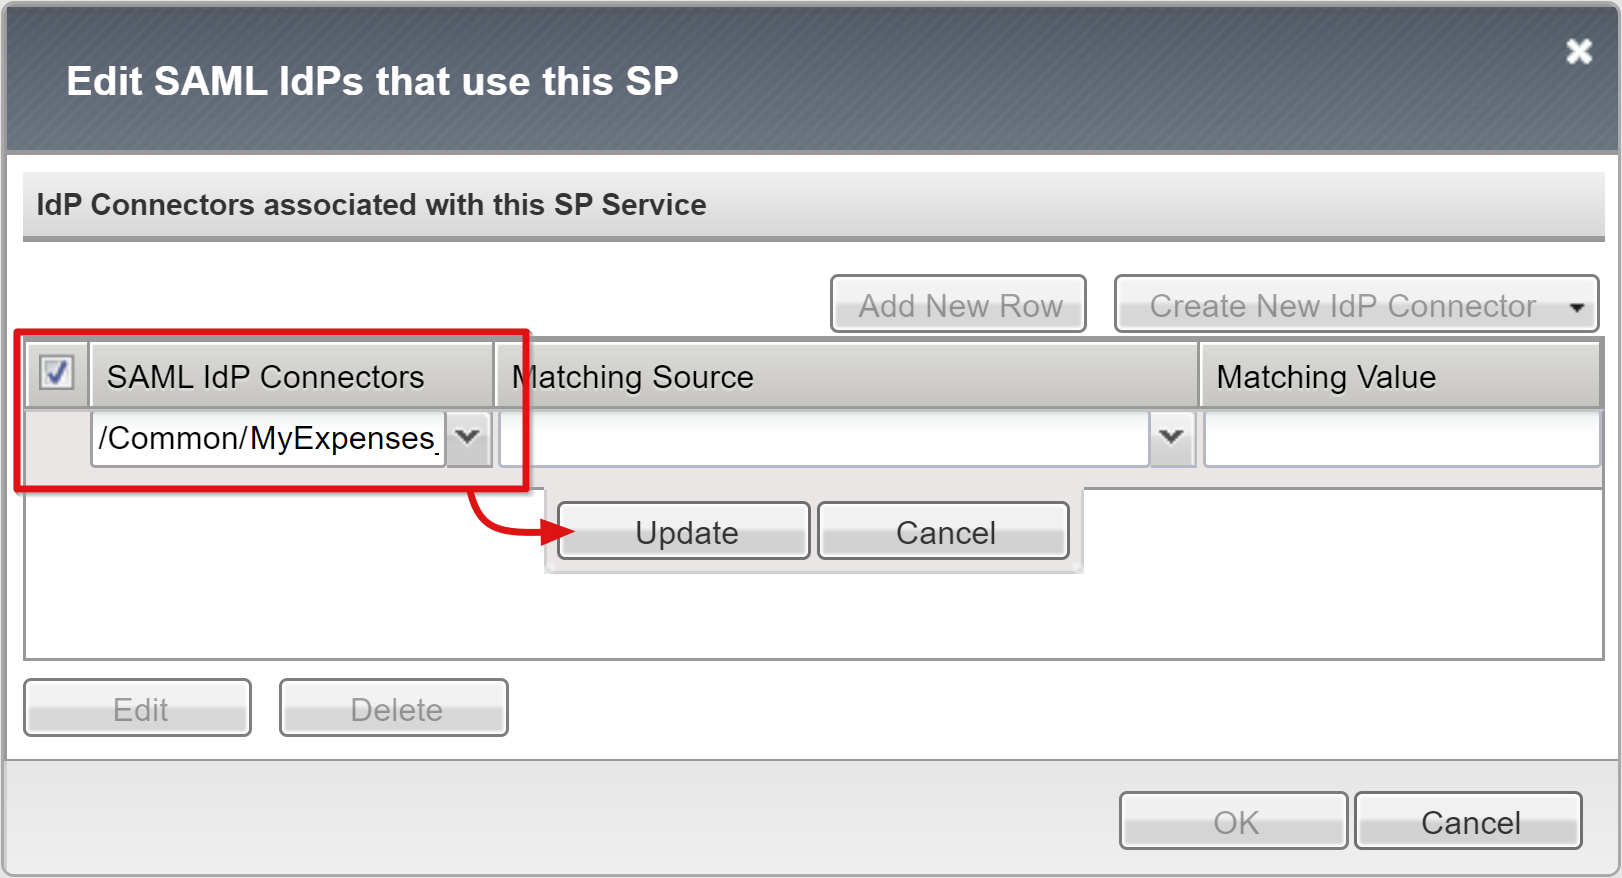 Screenshot of the Update option for the SAML IdP Connector entry.